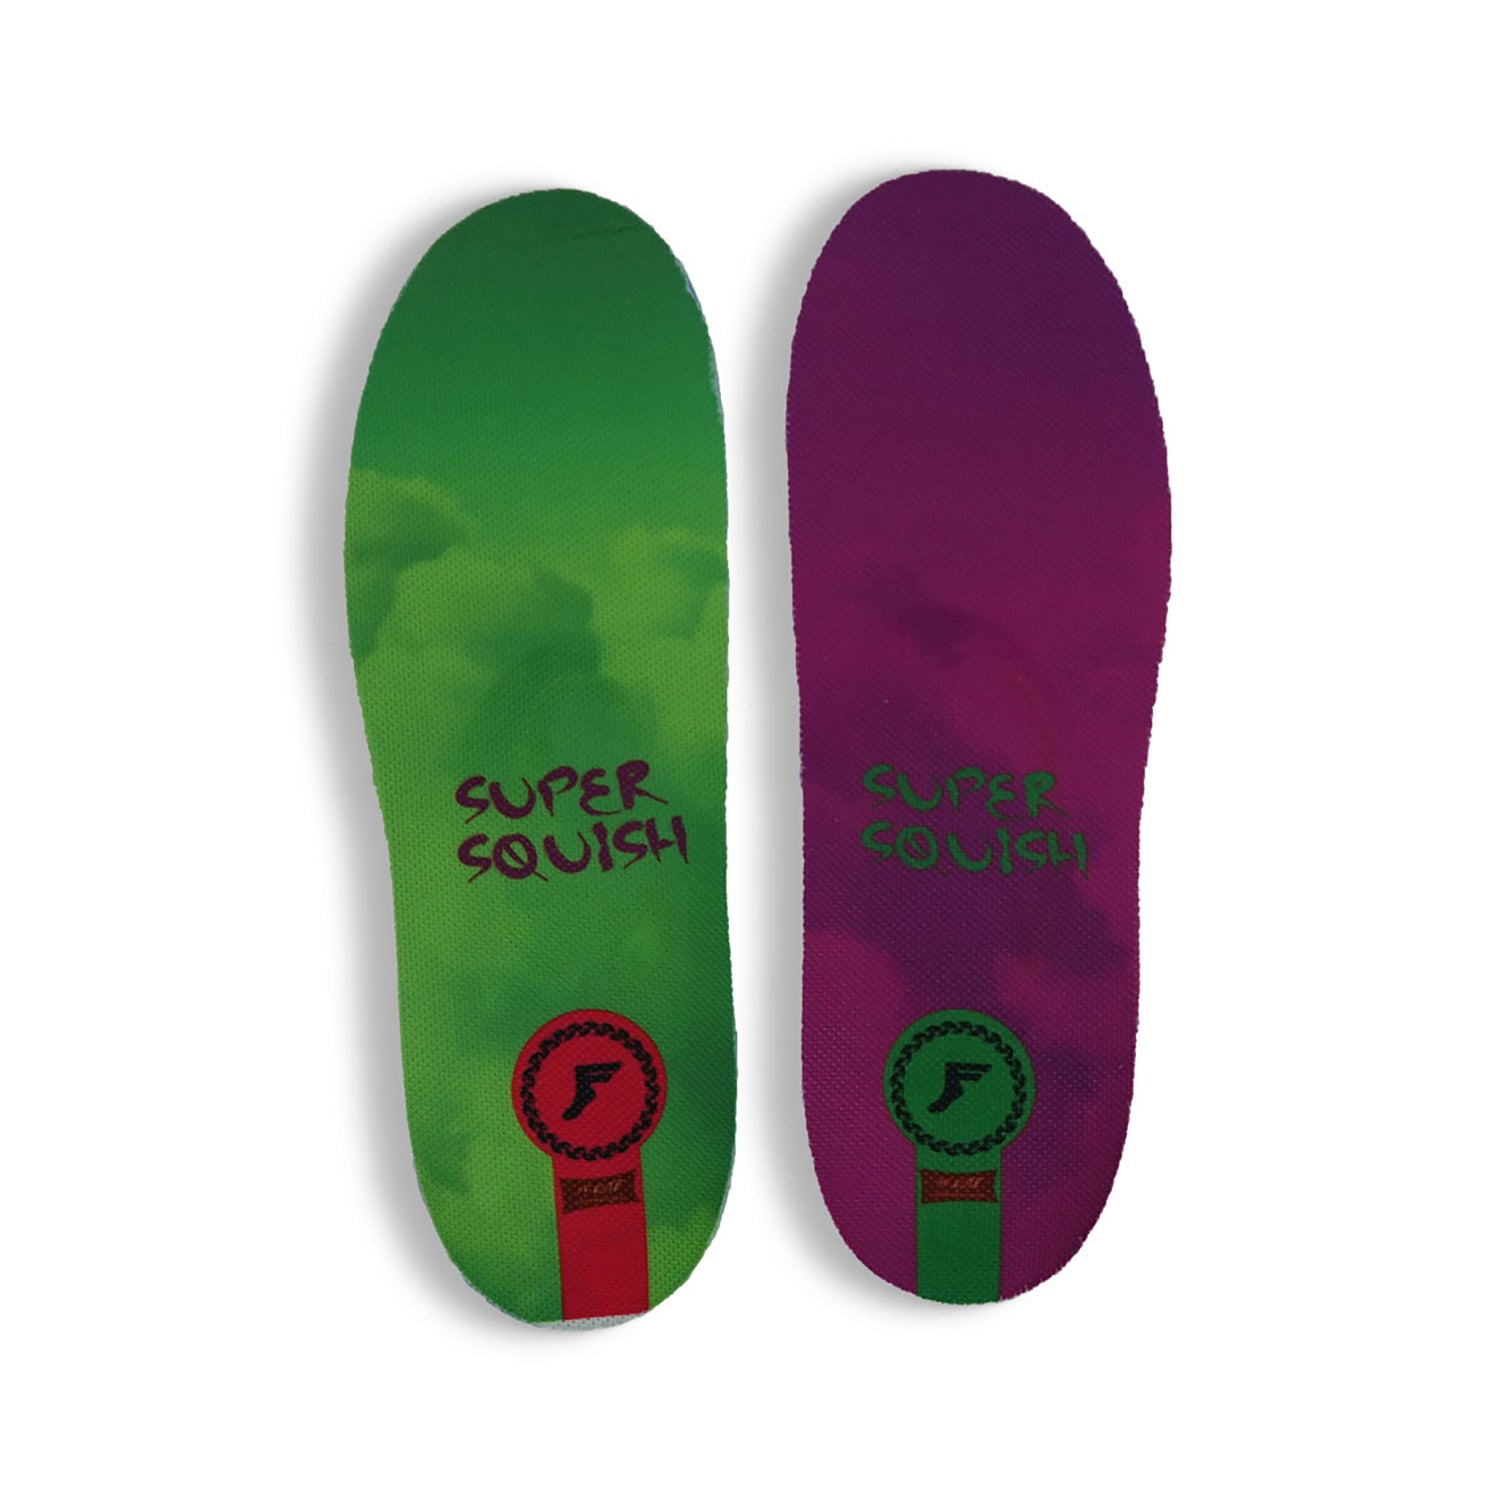 Soft Orthotic Insoles